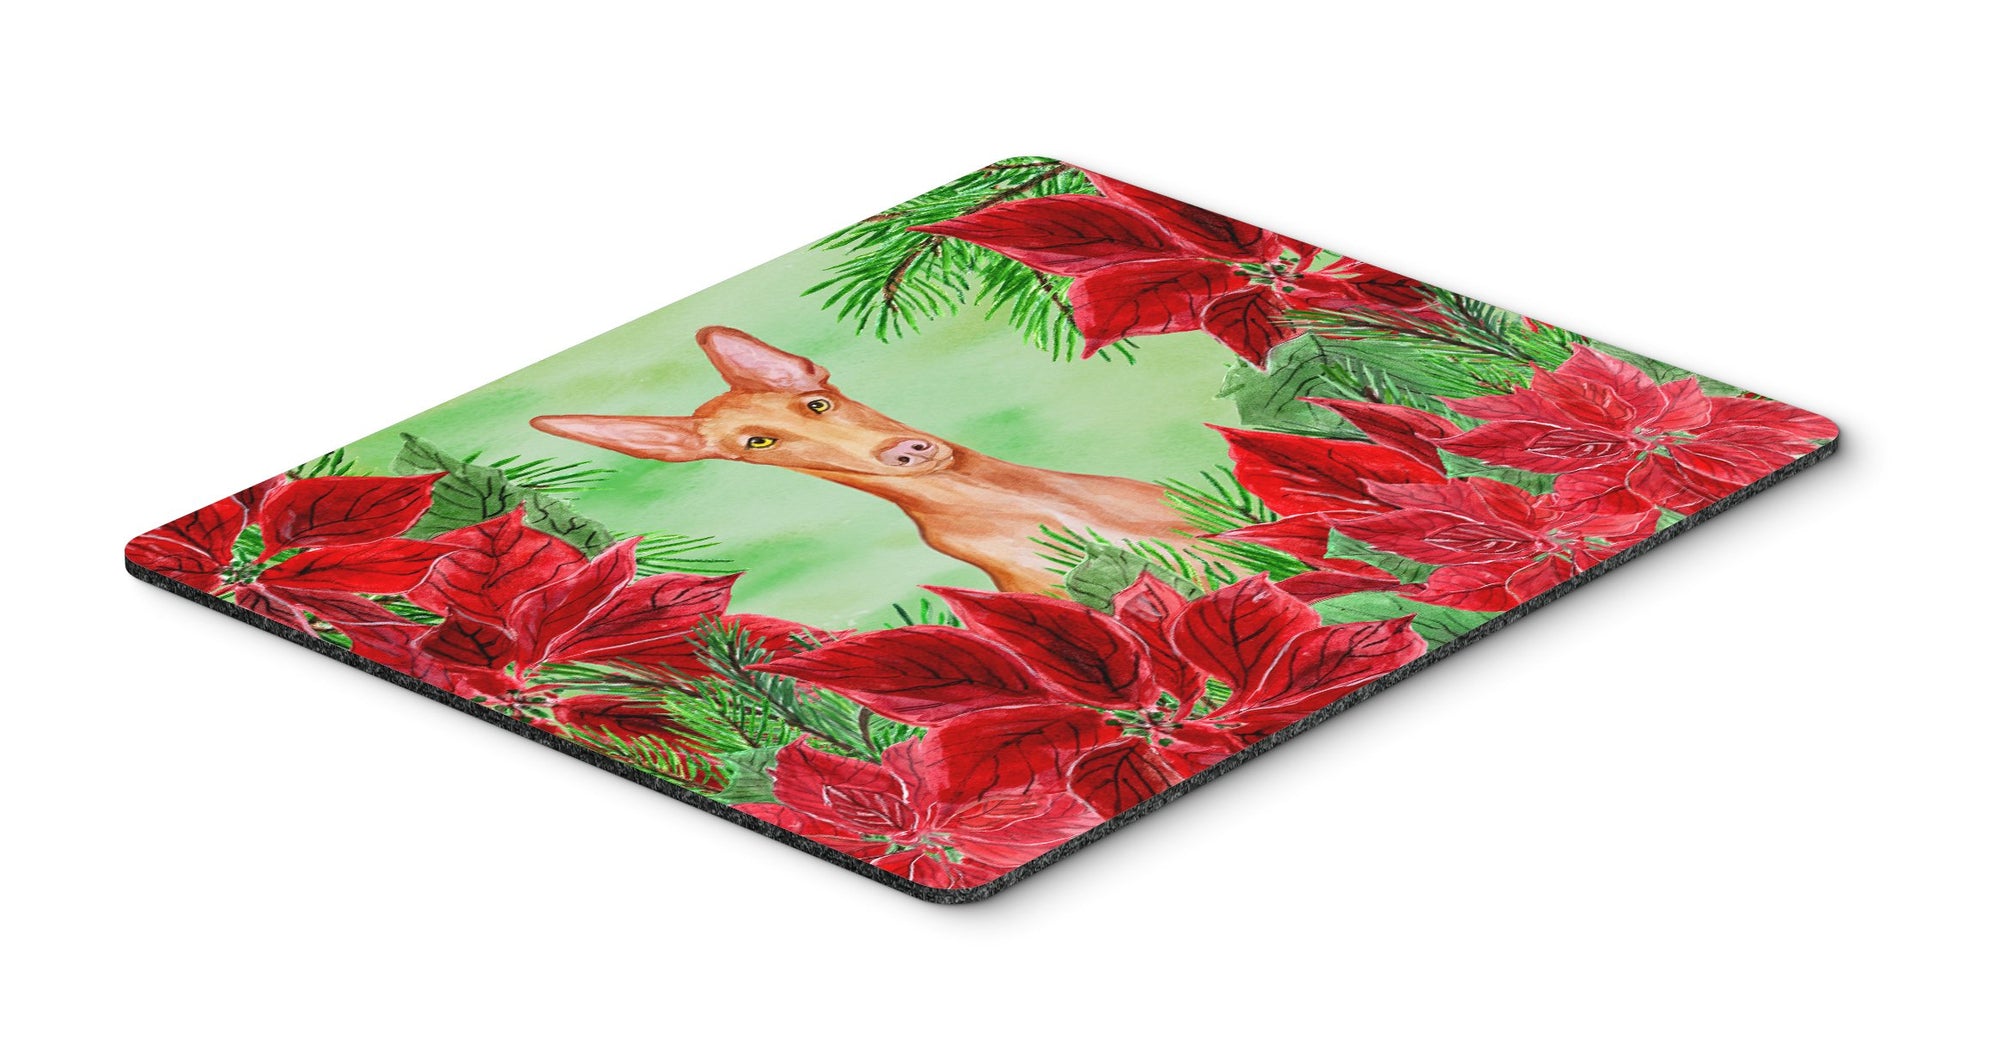 Pharaoh Hound Poinsettas Mouse Pad, Hot Pad or Trivet CK1362MP by Caroline's Treasures